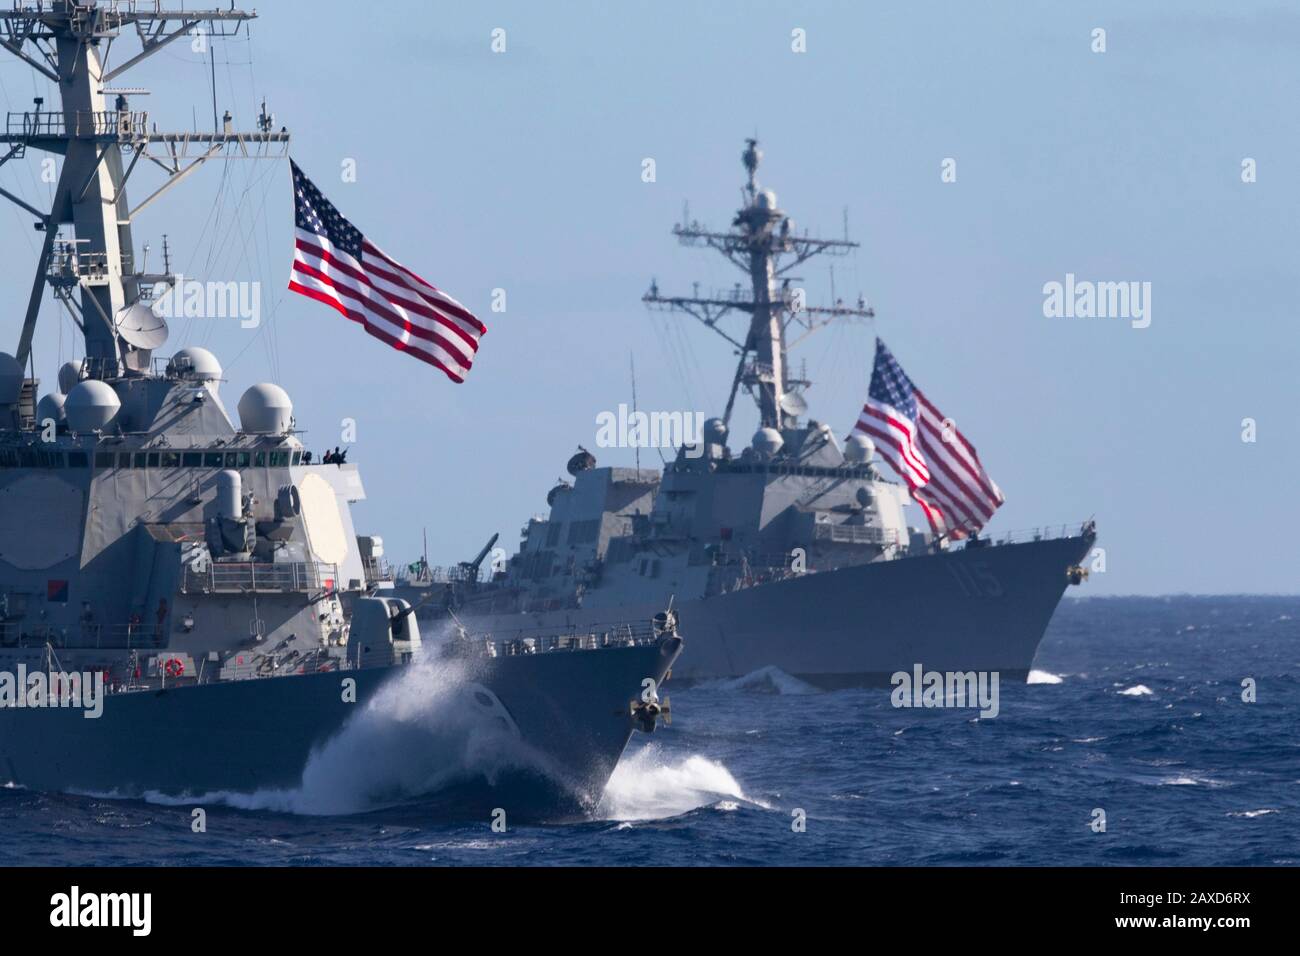 The U.S. Navy Arleigh Burke-class guided-missile destroyers USS Russell, left, and USS Rafael Peralta transition the Pacific Ocean with the Theodore Roosevelt Carrier Strike Group January 25, 2020 in the Pacific Ocean. Stock Photo